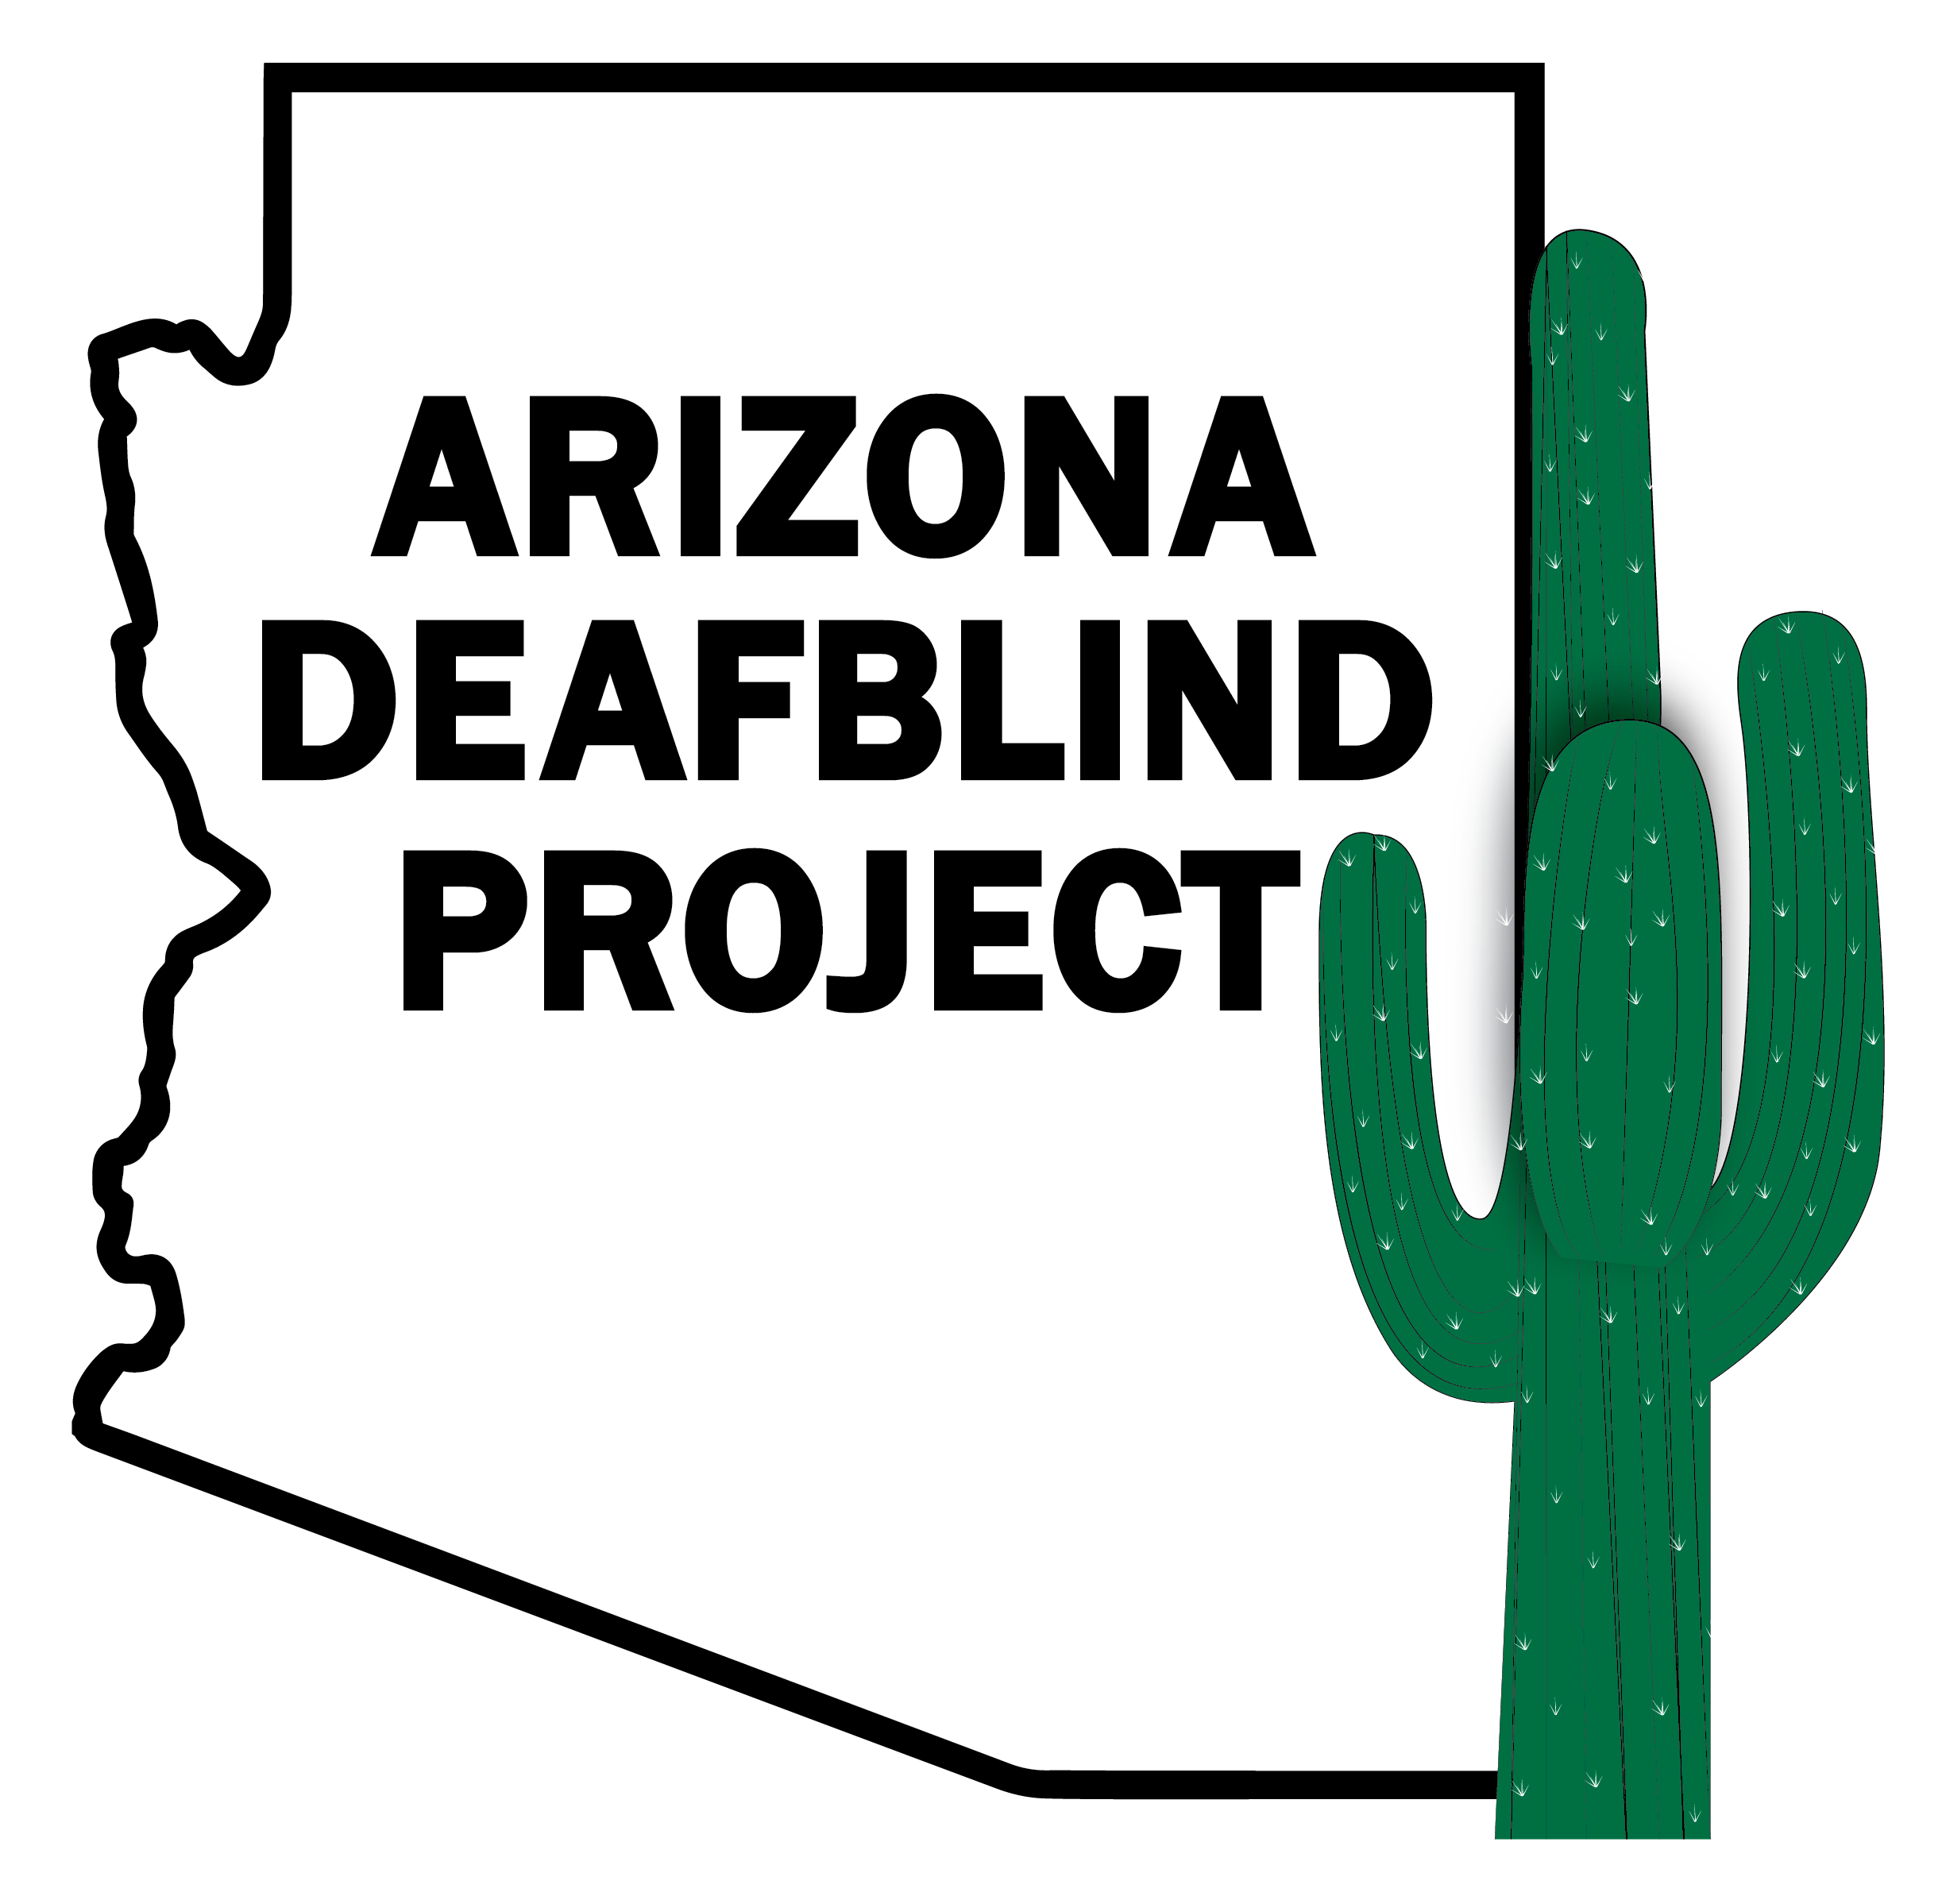 Arizona Deaf Blind Project logo represented by the AZ state outline and a cactus